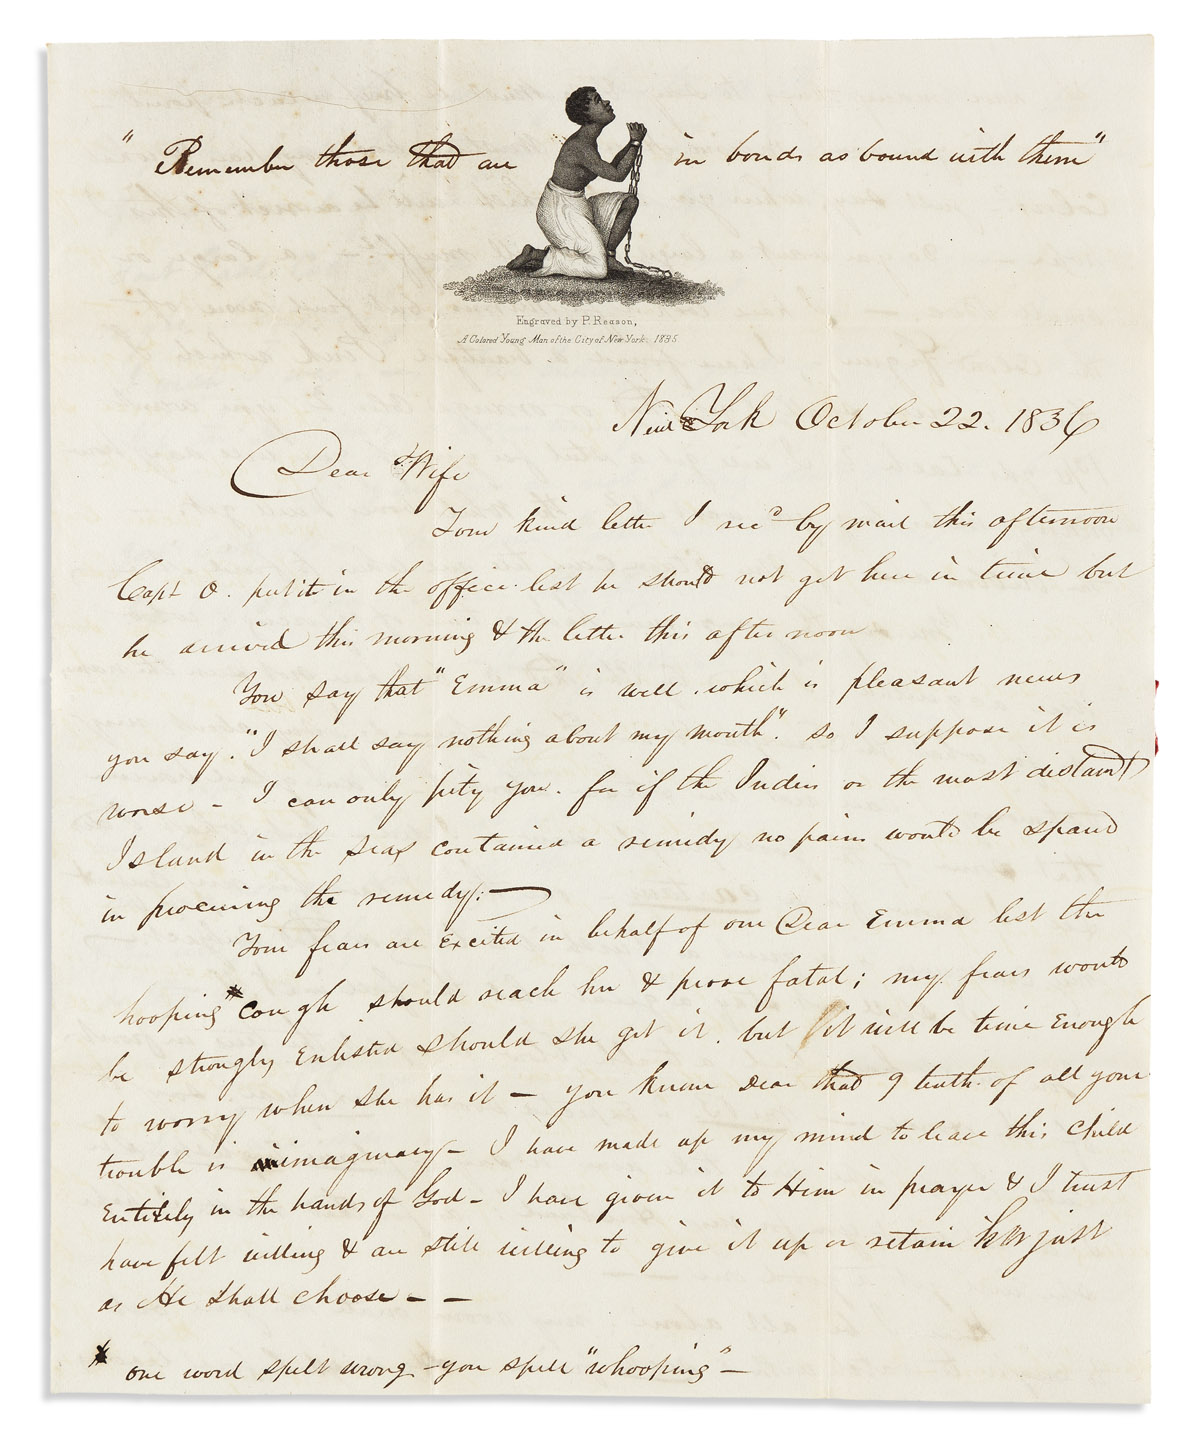 (SLAVERY & ABOLITION.) Letter written on stationery, with the famed engraving by Patrick Reason.